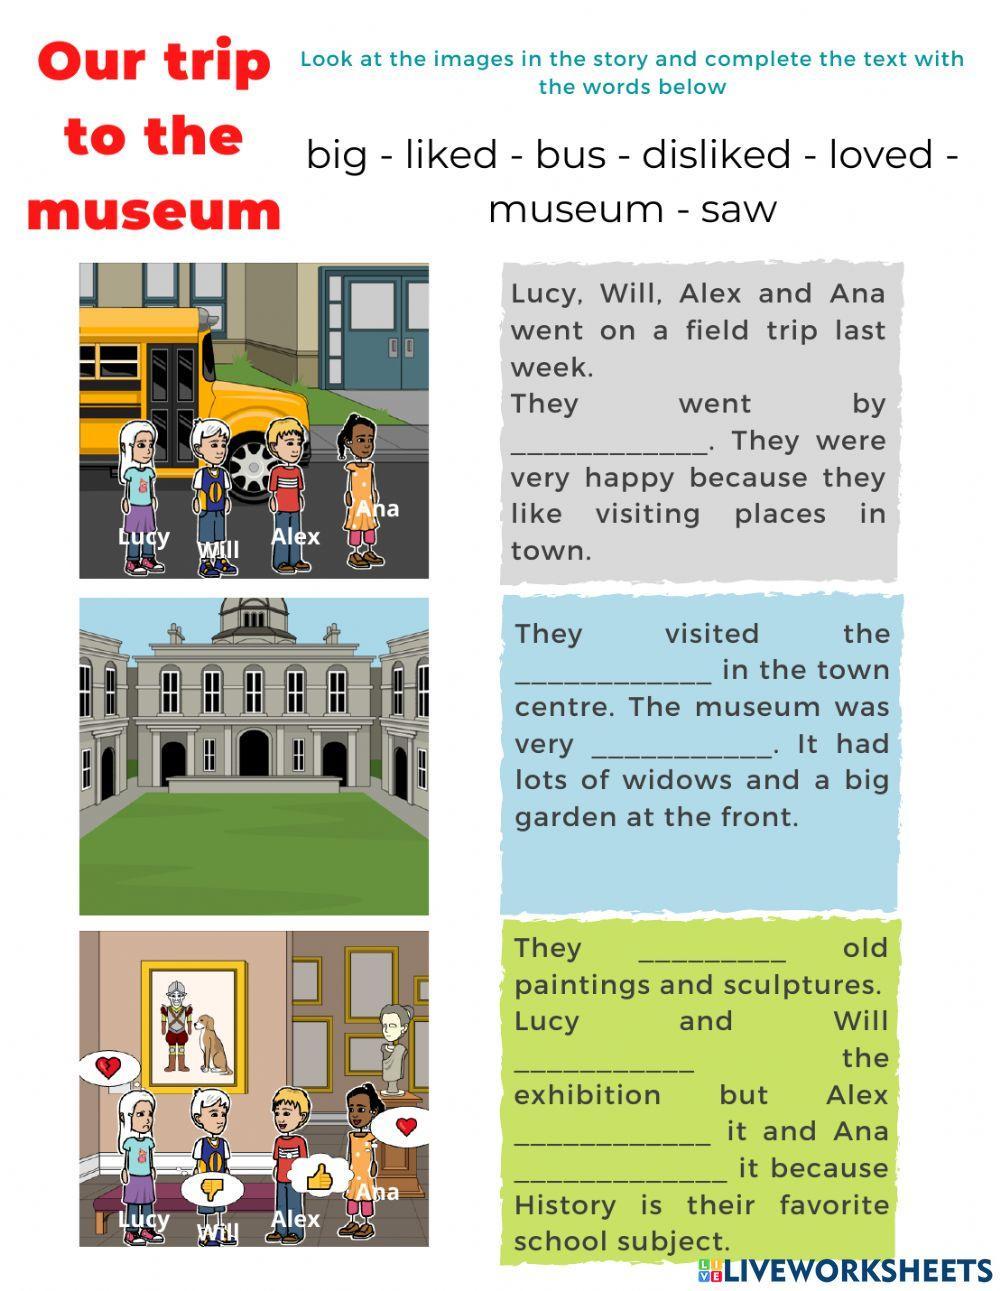 Our trip to the museum